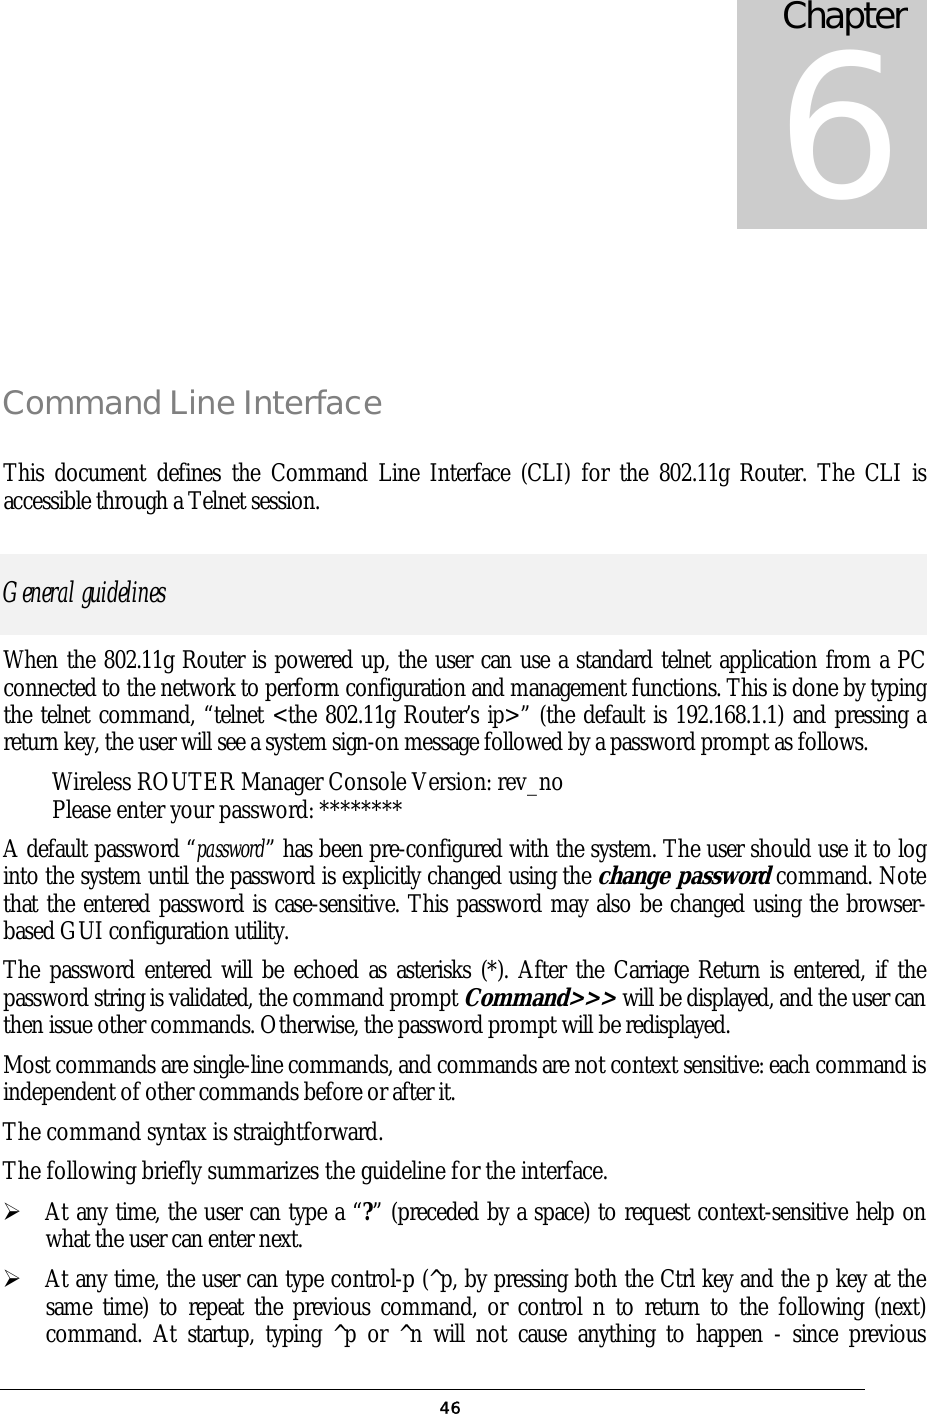  46 Command Line Interface This document defines the Command Line Interface (CLI) for the 802.11g Router. The CLI is accessible through a Telnet session.  General guidelines When the 802.11g Router is powered up, the user can use a standard telnet application from a PC connected to the network to perform configuration and management functions. This is done by typing the telnet command, “telnet &lt;the 802.11g Router’s ip&gt;” (the default is 192.168.1.1) and pressing a return key, the user will see a system sign-on message followed by a password prompt as follows. Wireless ROUTER Manager Console Version: rev_no Please enter your password: ******** A default password “password” has been pre-configured with the system. The user should use it to log into the system until the password is explicitly changed using the change password command. Note that the entered password is case-sensitive. This password may also be changed using the browser-based GUI configuration utility.  The password entered will be echoed as asterisks (*). After the Carriage Return is entered, if the password string is validated, the command prompt Command&gt;&gt;&gt; will be displayed, and the user can then issue other commands. Otherwise, the password prompt will be redisplayed. Most commands are single-line commands, and commands are not context sensitive: each command is independent of other commands before or after it. The command syntax is straightforward. The following briefly summarizes the guideline for the interface.  At any time, the user can type a “?” (preceded by a space) to request context-sensitive help on what the user can enter next.  At any time, the user can type control-p (^p, by pressing both the Ctrl key and the p key at the same time) to repeat the previous command, or control n to return to the following (next) command. At startup, typing ^p or ^n will not cause anything to happen - since previous Chapter 6 